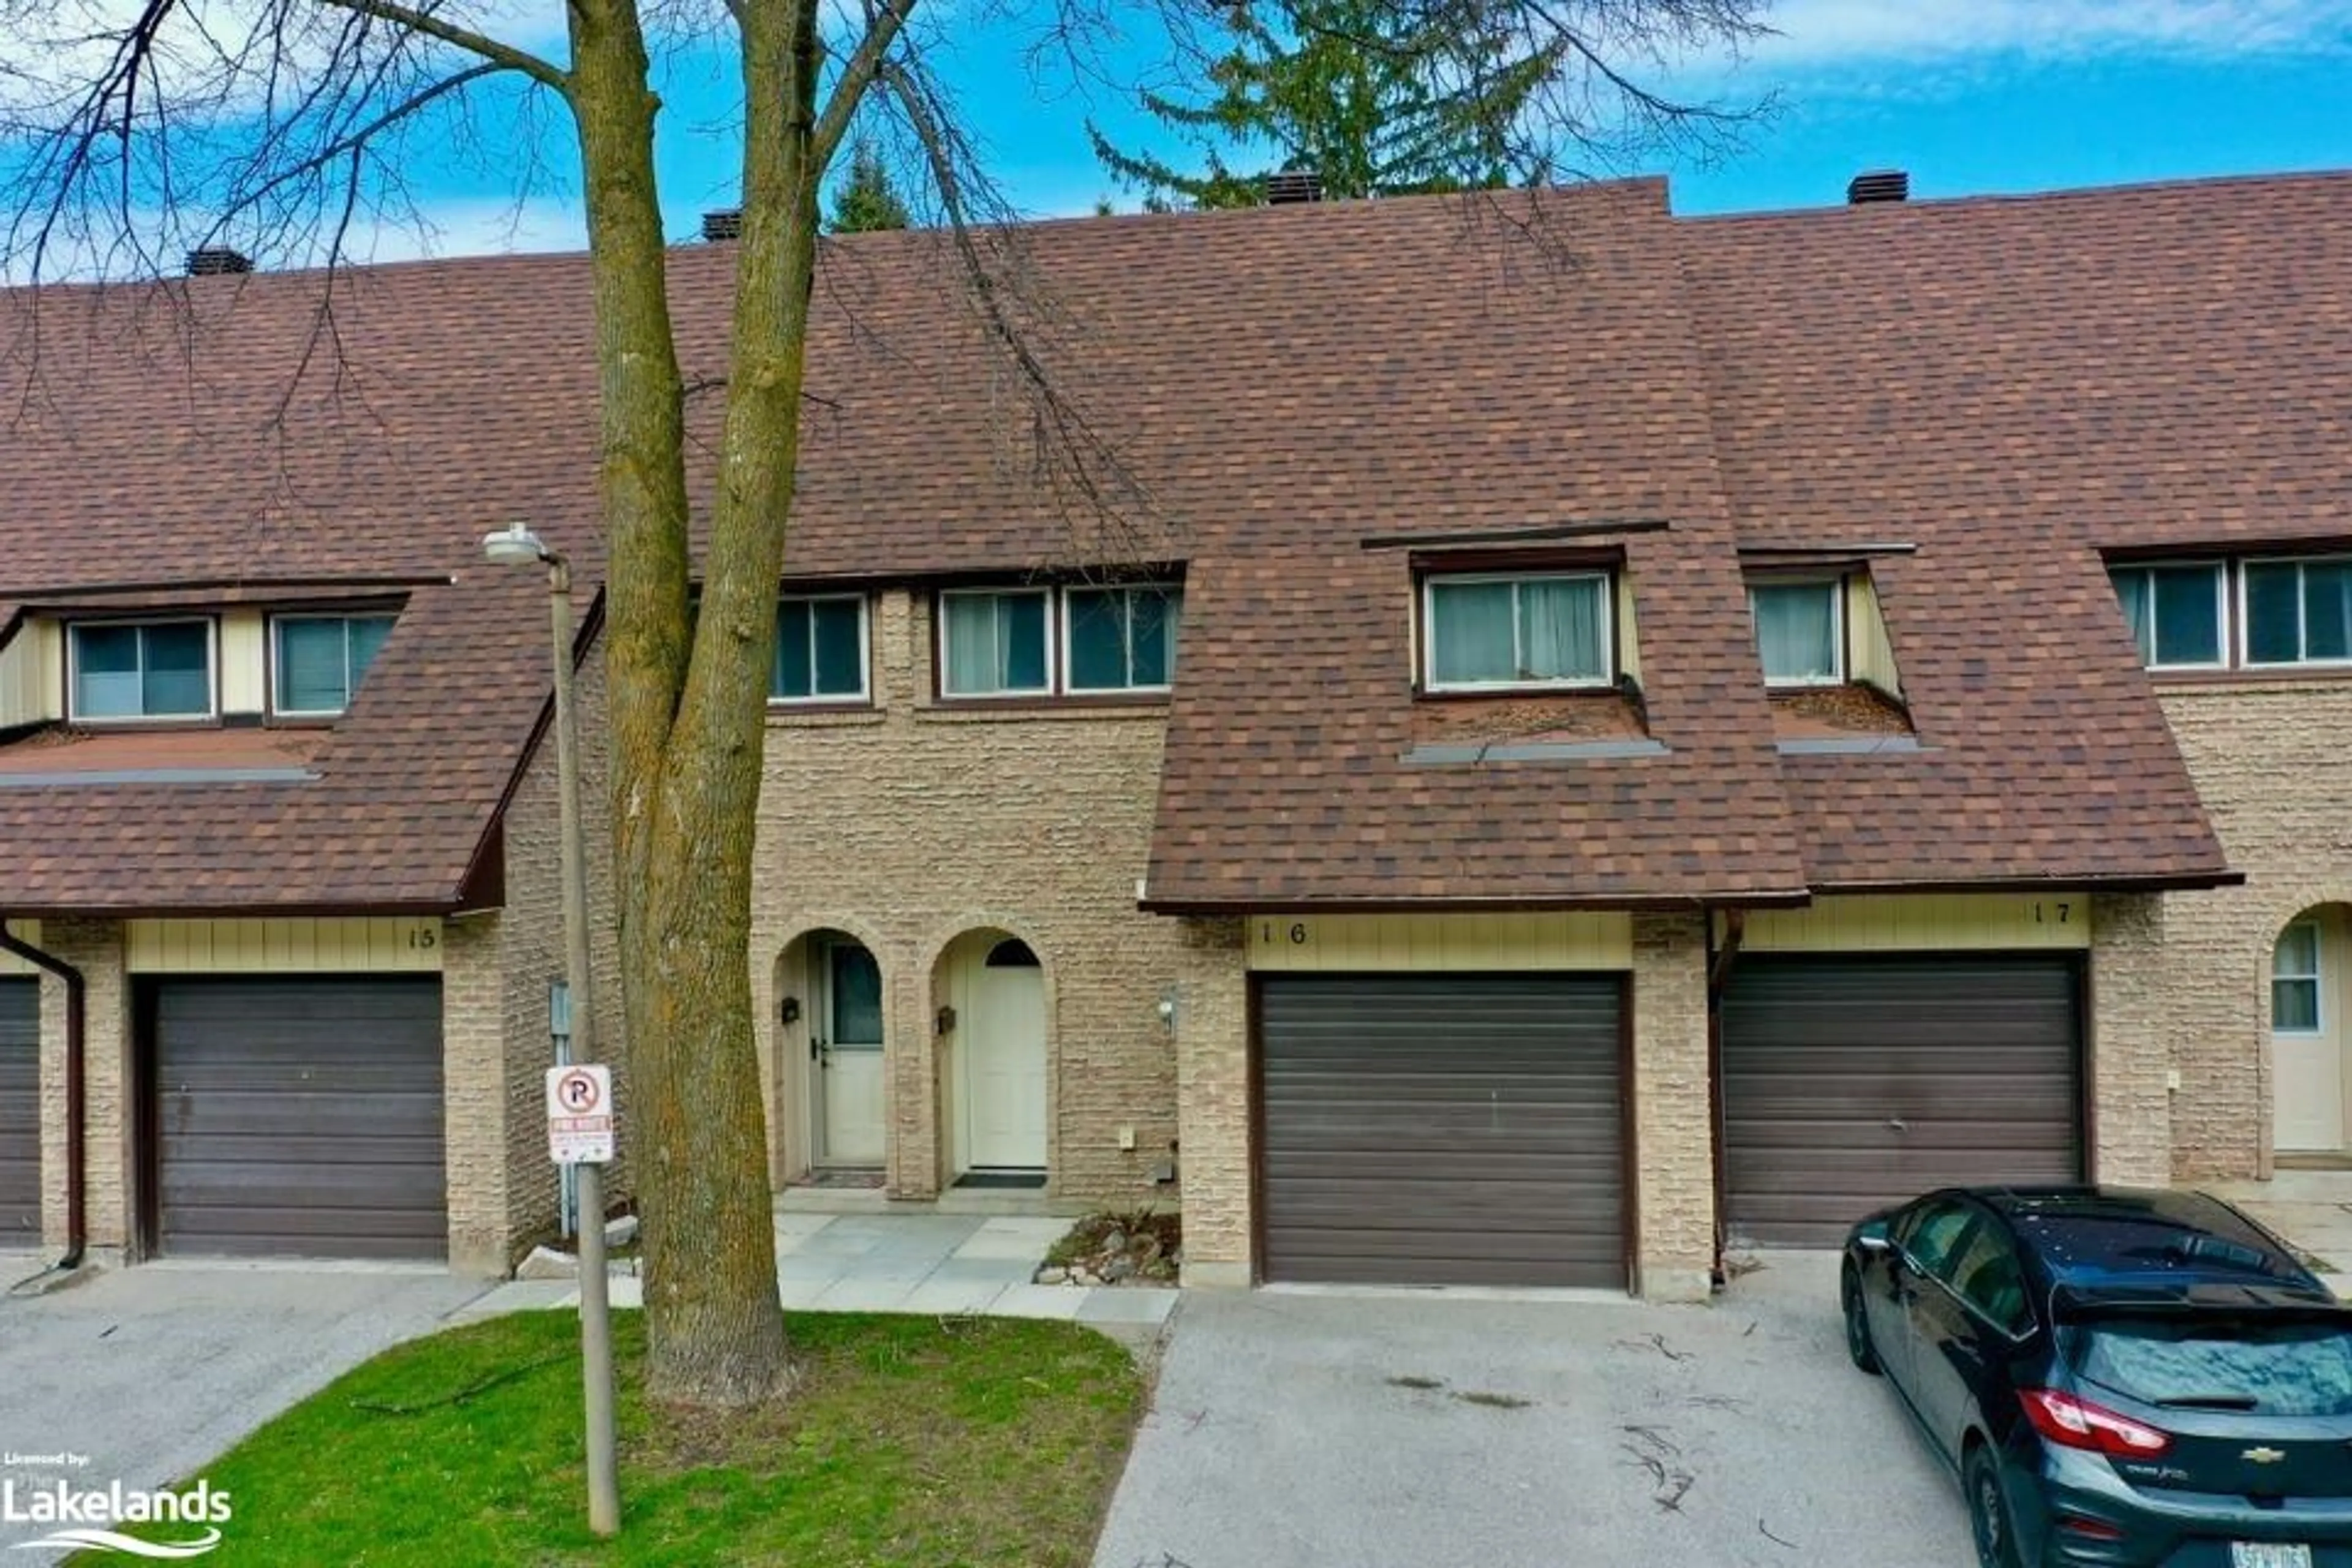 A pic from exterior of the house or condo for 67 Fittons Rd #16, Orillia Ontario L3V 2J2